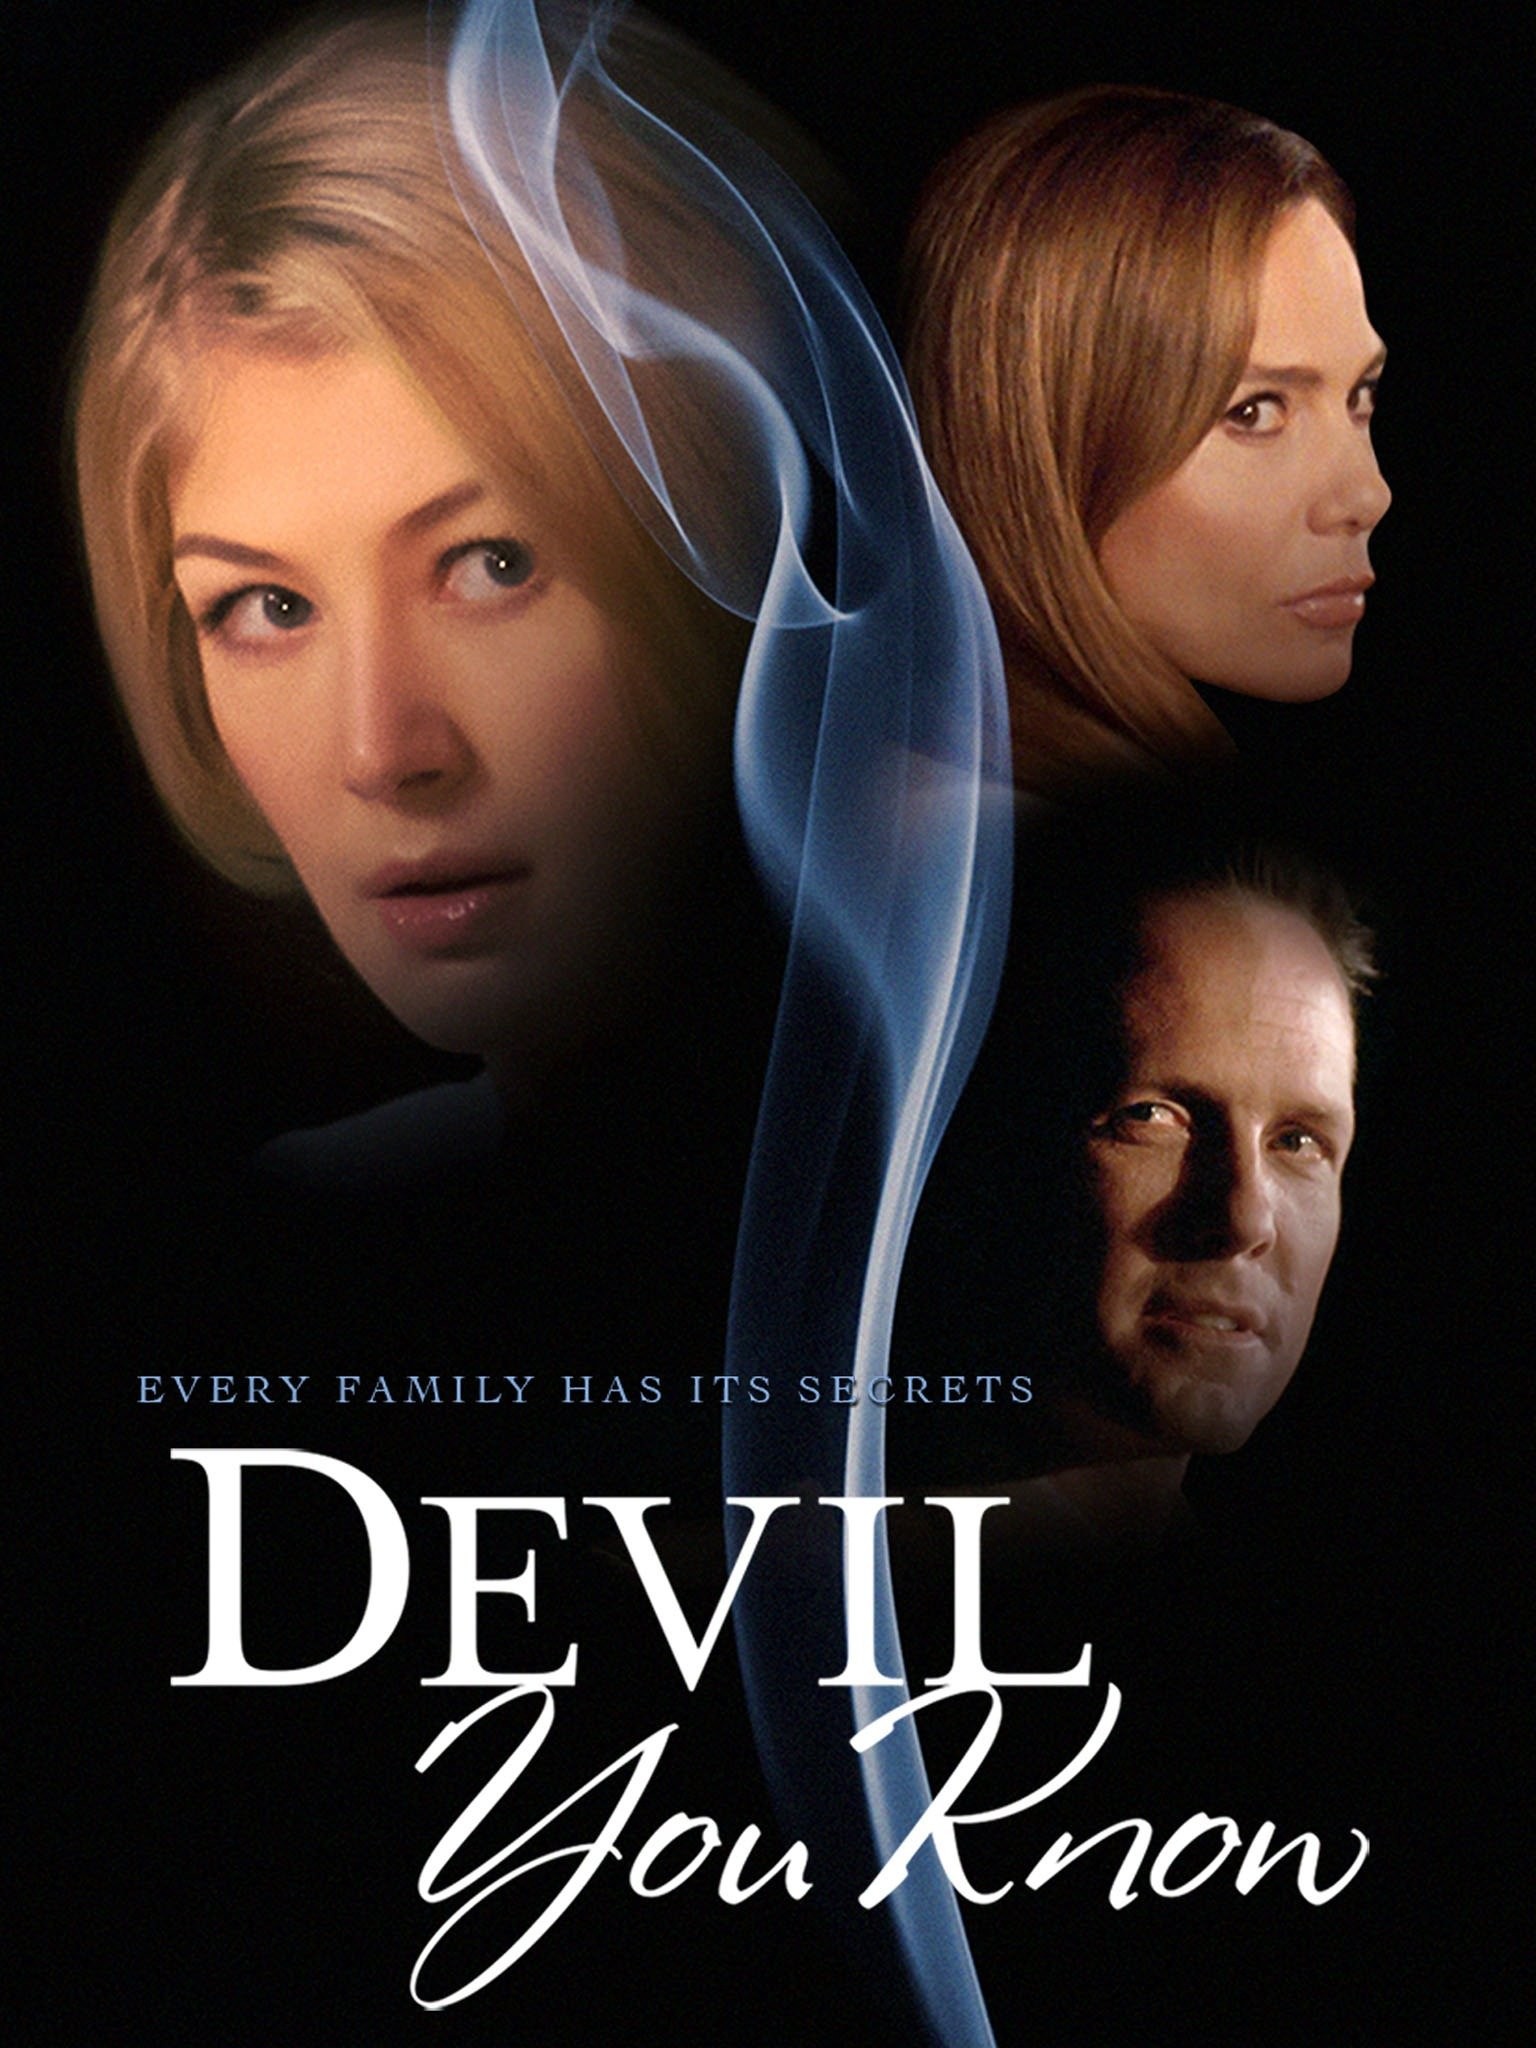 The Devil You Know: Season 1, Episode 3 - Rotten Tomatoes